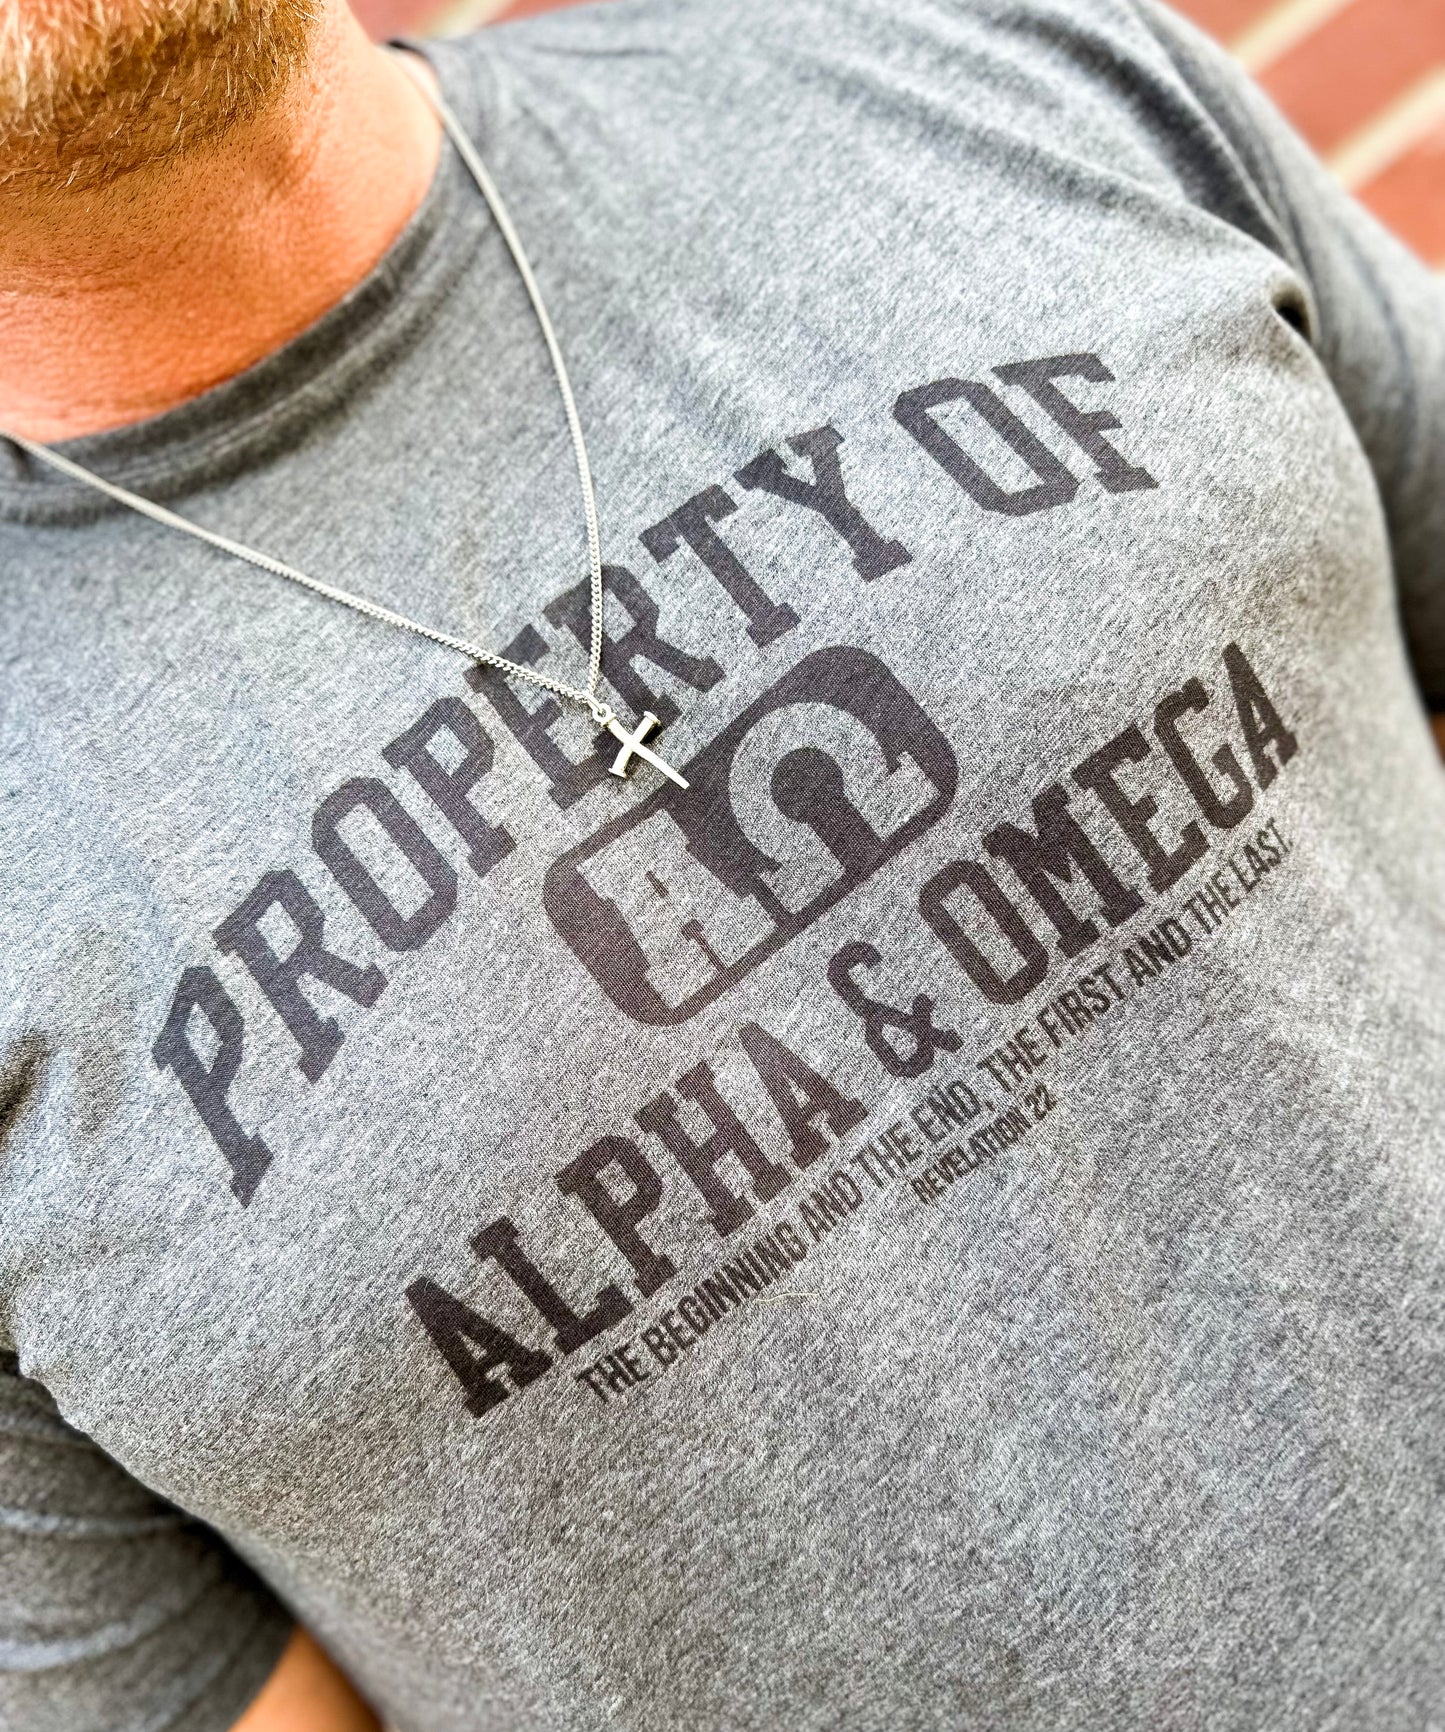 Property of Alpha and Omega shirt